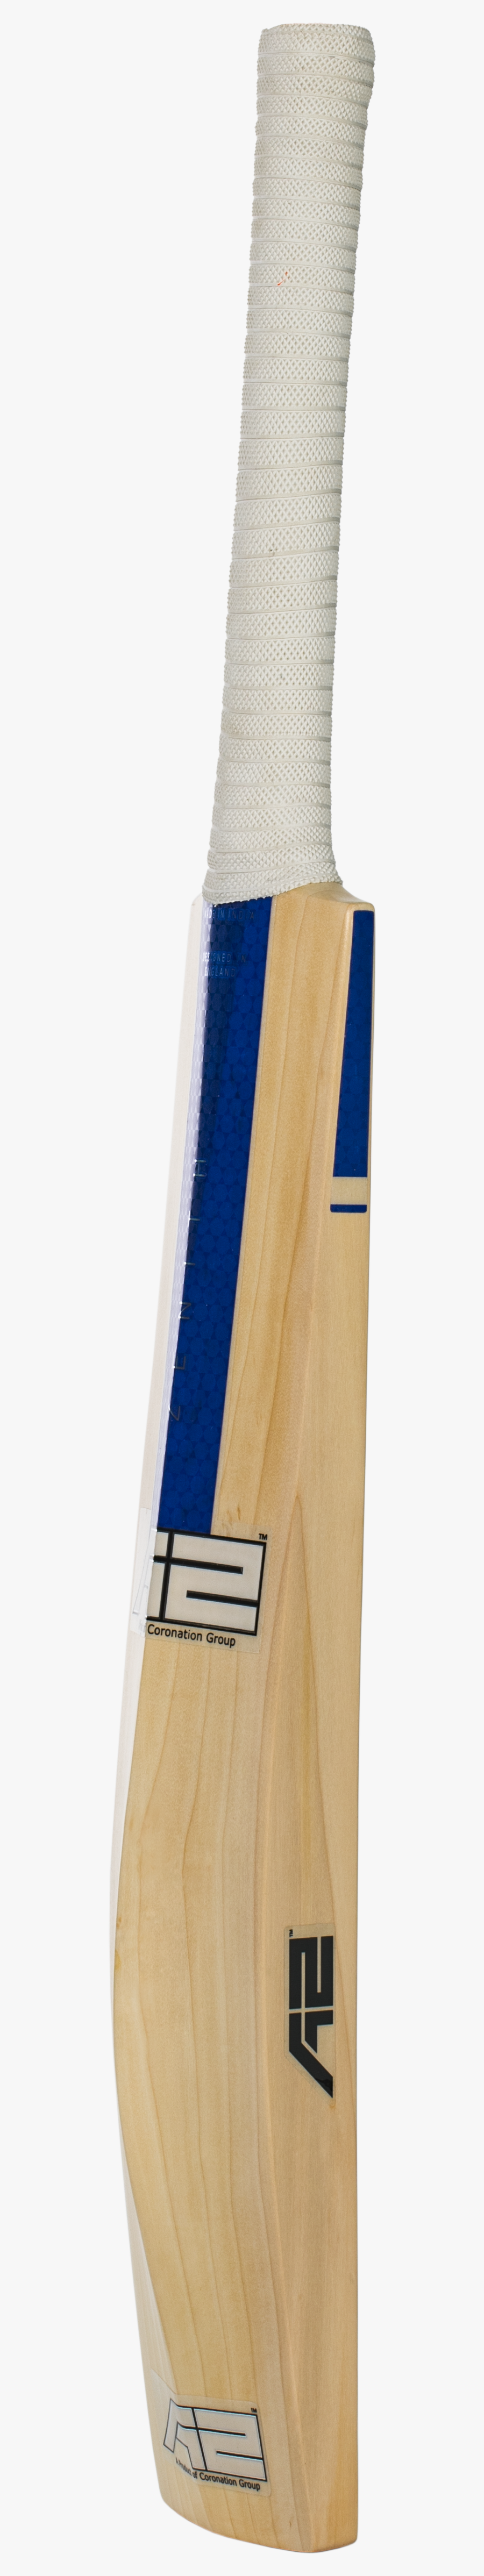 Zenith - English Willow Cricket Bat Manufacturers In India, Transparent Clipart